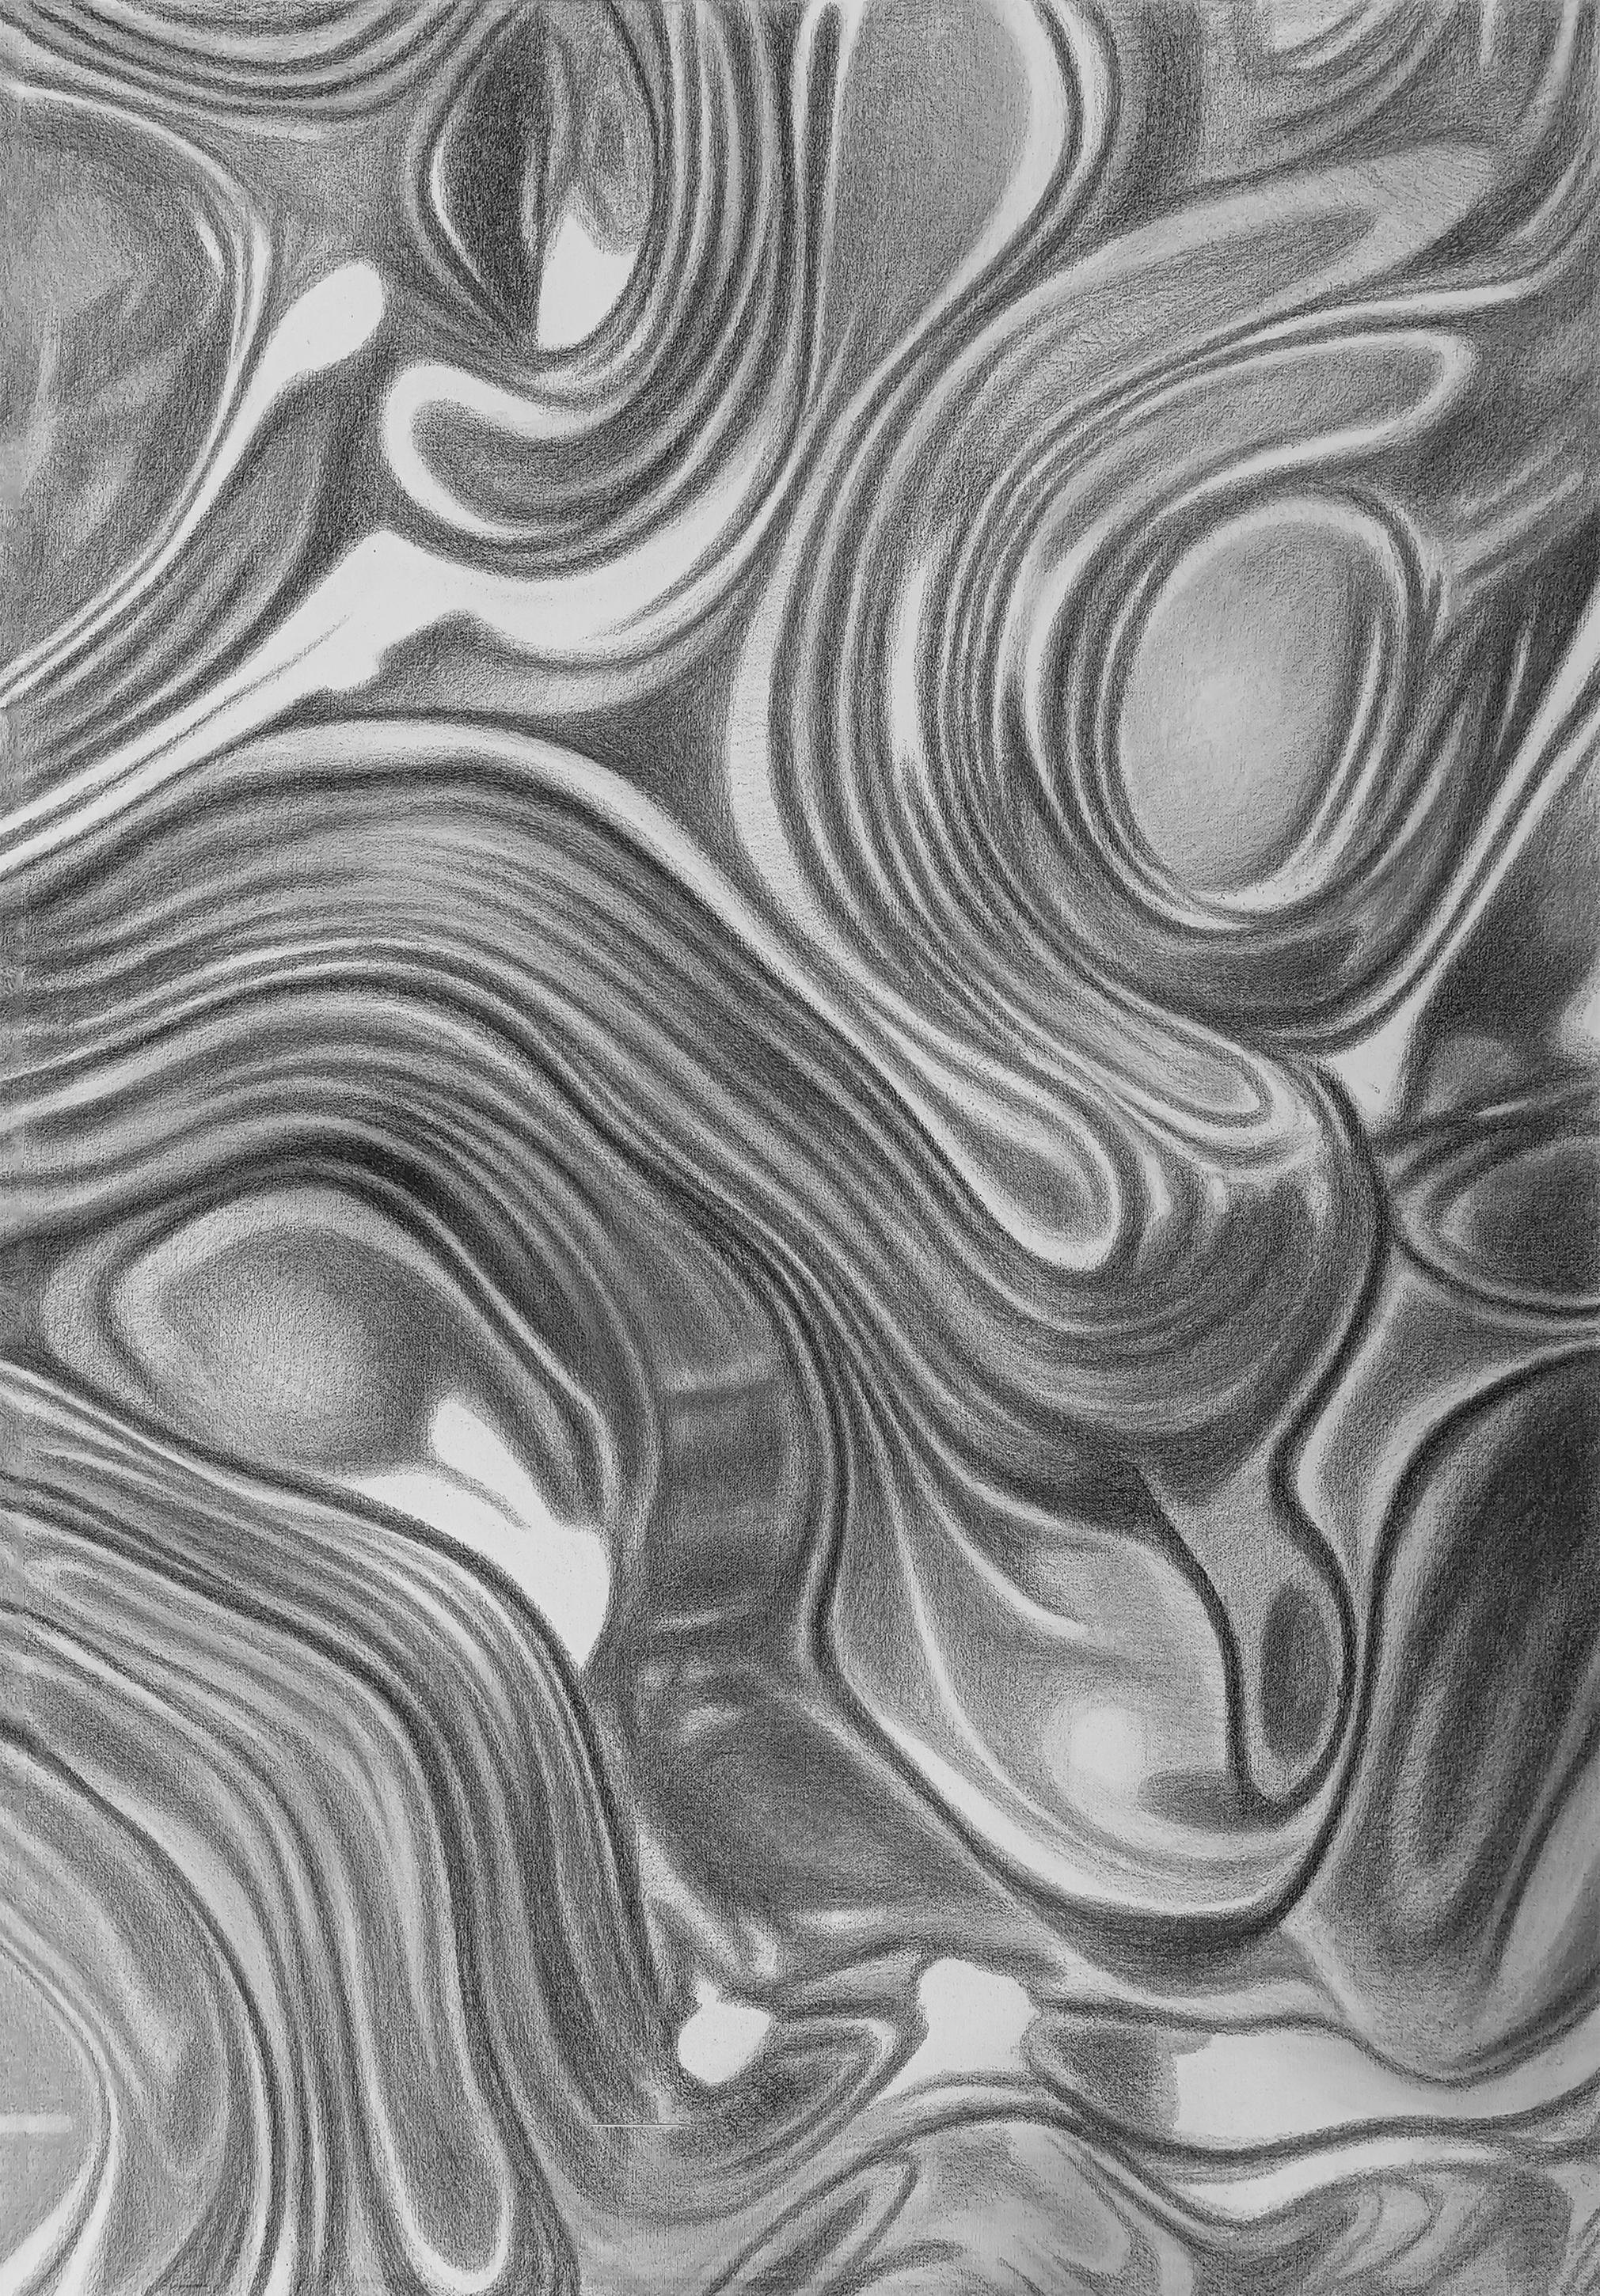 Fluidos. Painting From the series Plato’s Heaven.  Charcoal on canvas